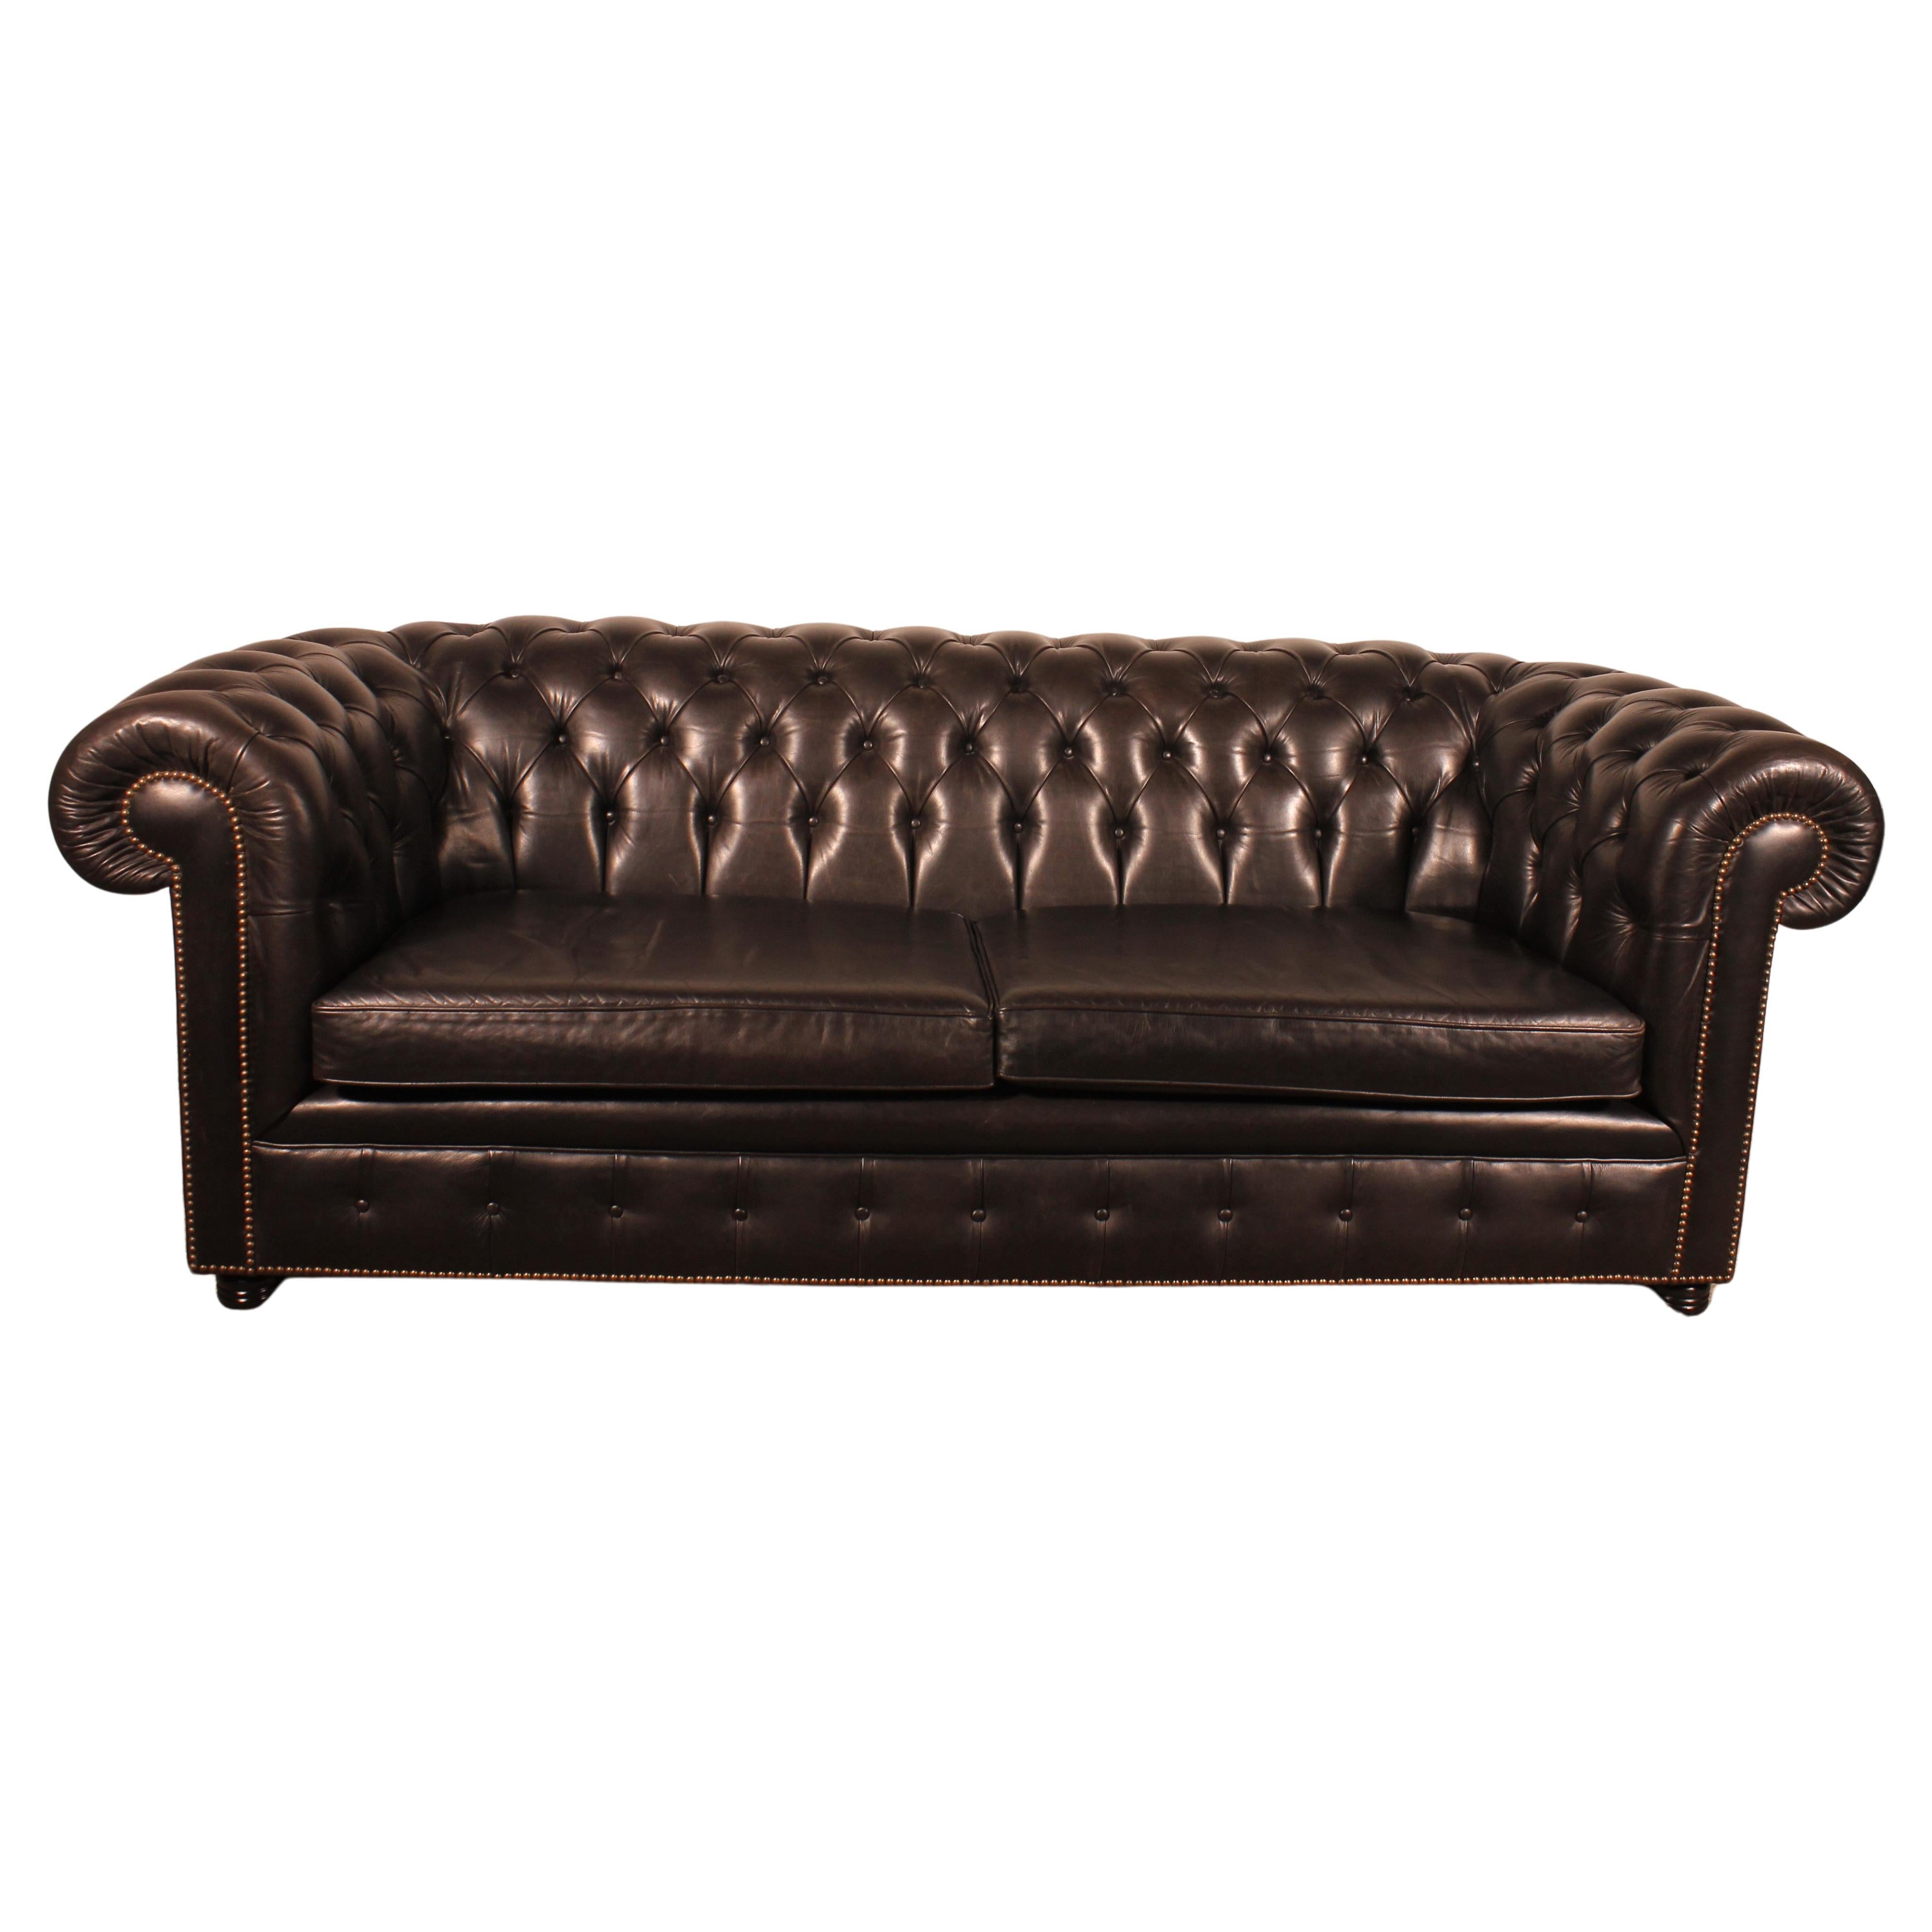 Black Leather Chesterfield Sofa For Sale